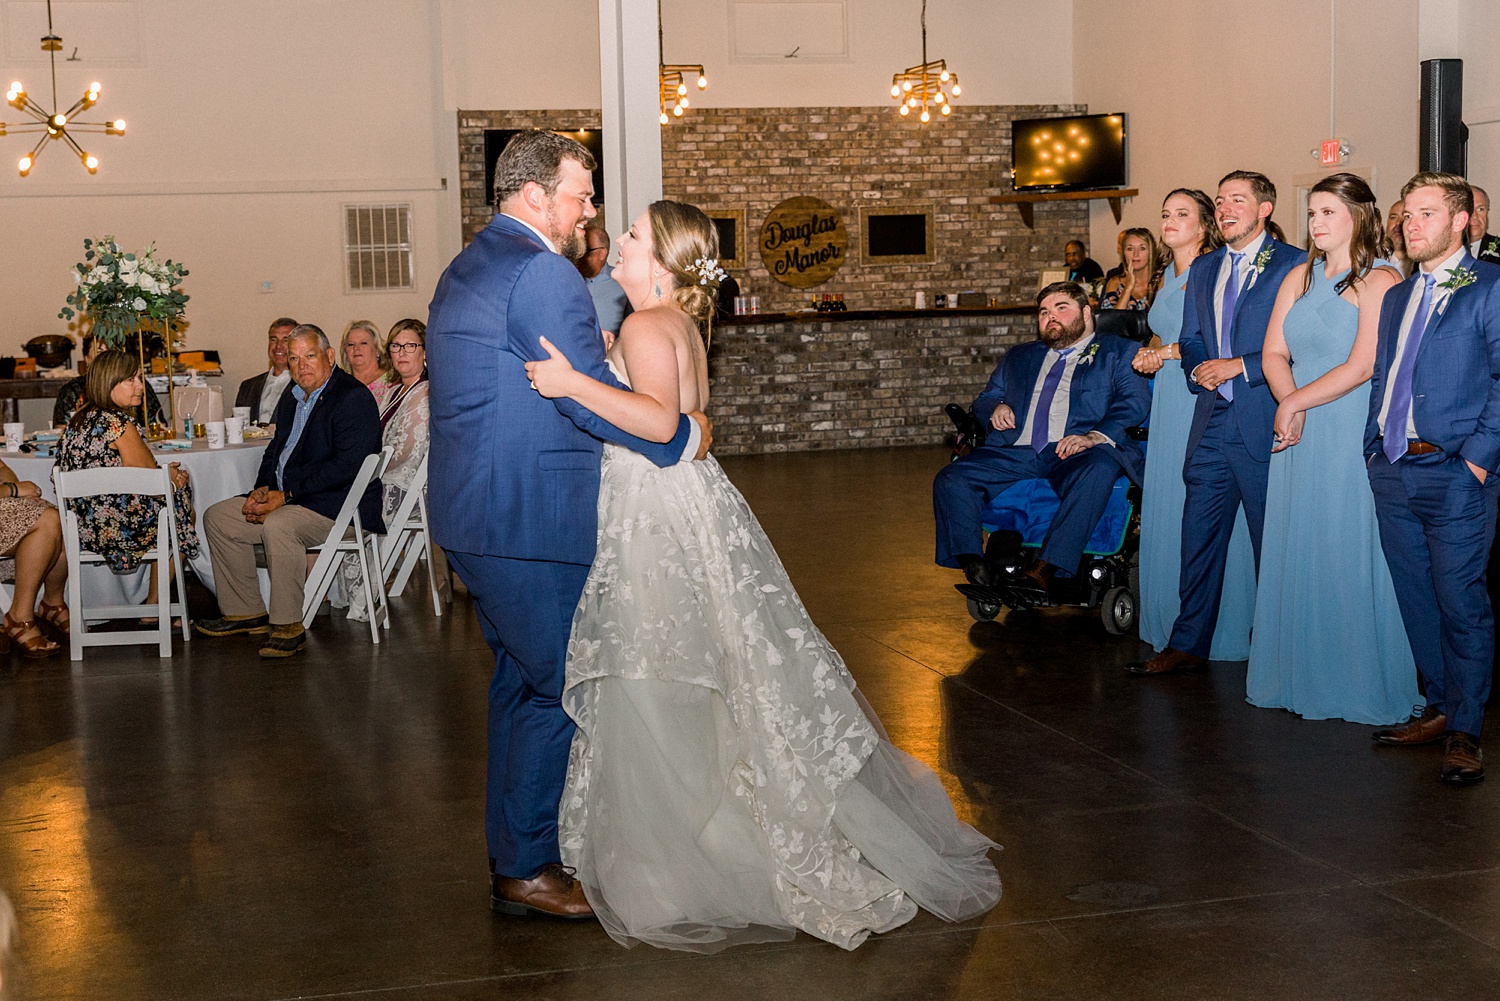 first dance for bride and groom at Douglas Manor wedding reception